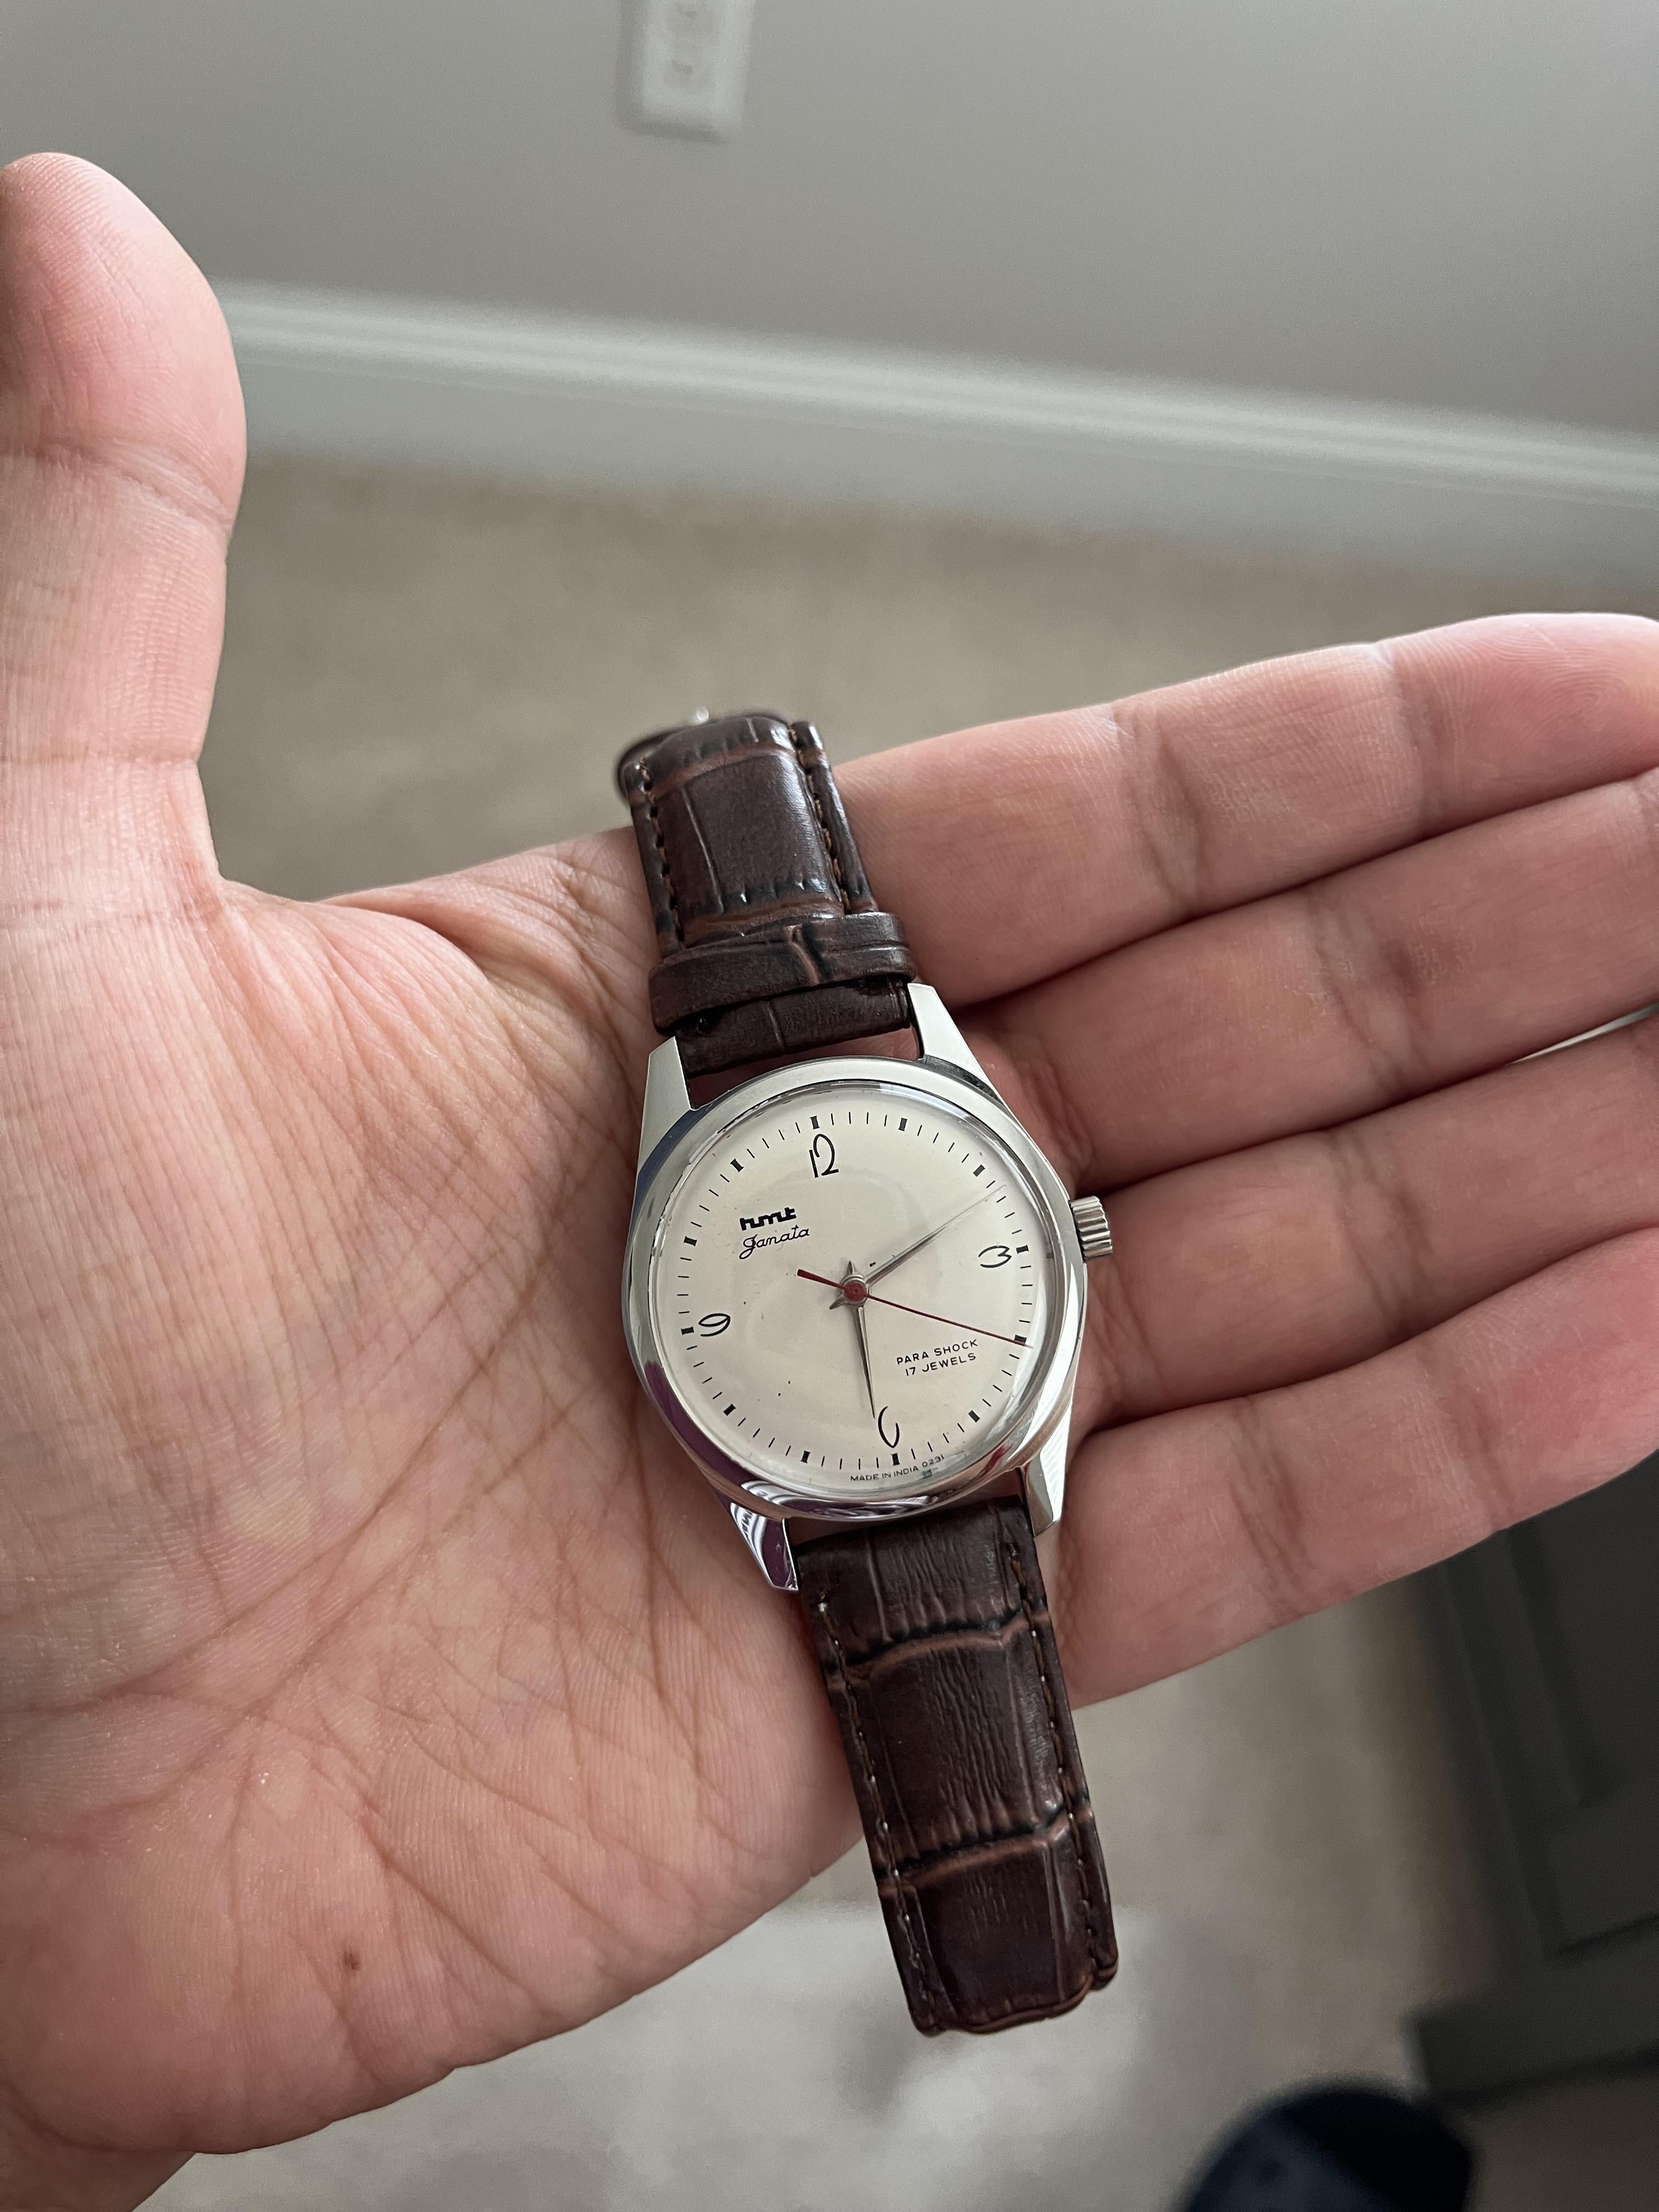 HMT Janata golden case with silver dial and transparent back : r/hmtwatches